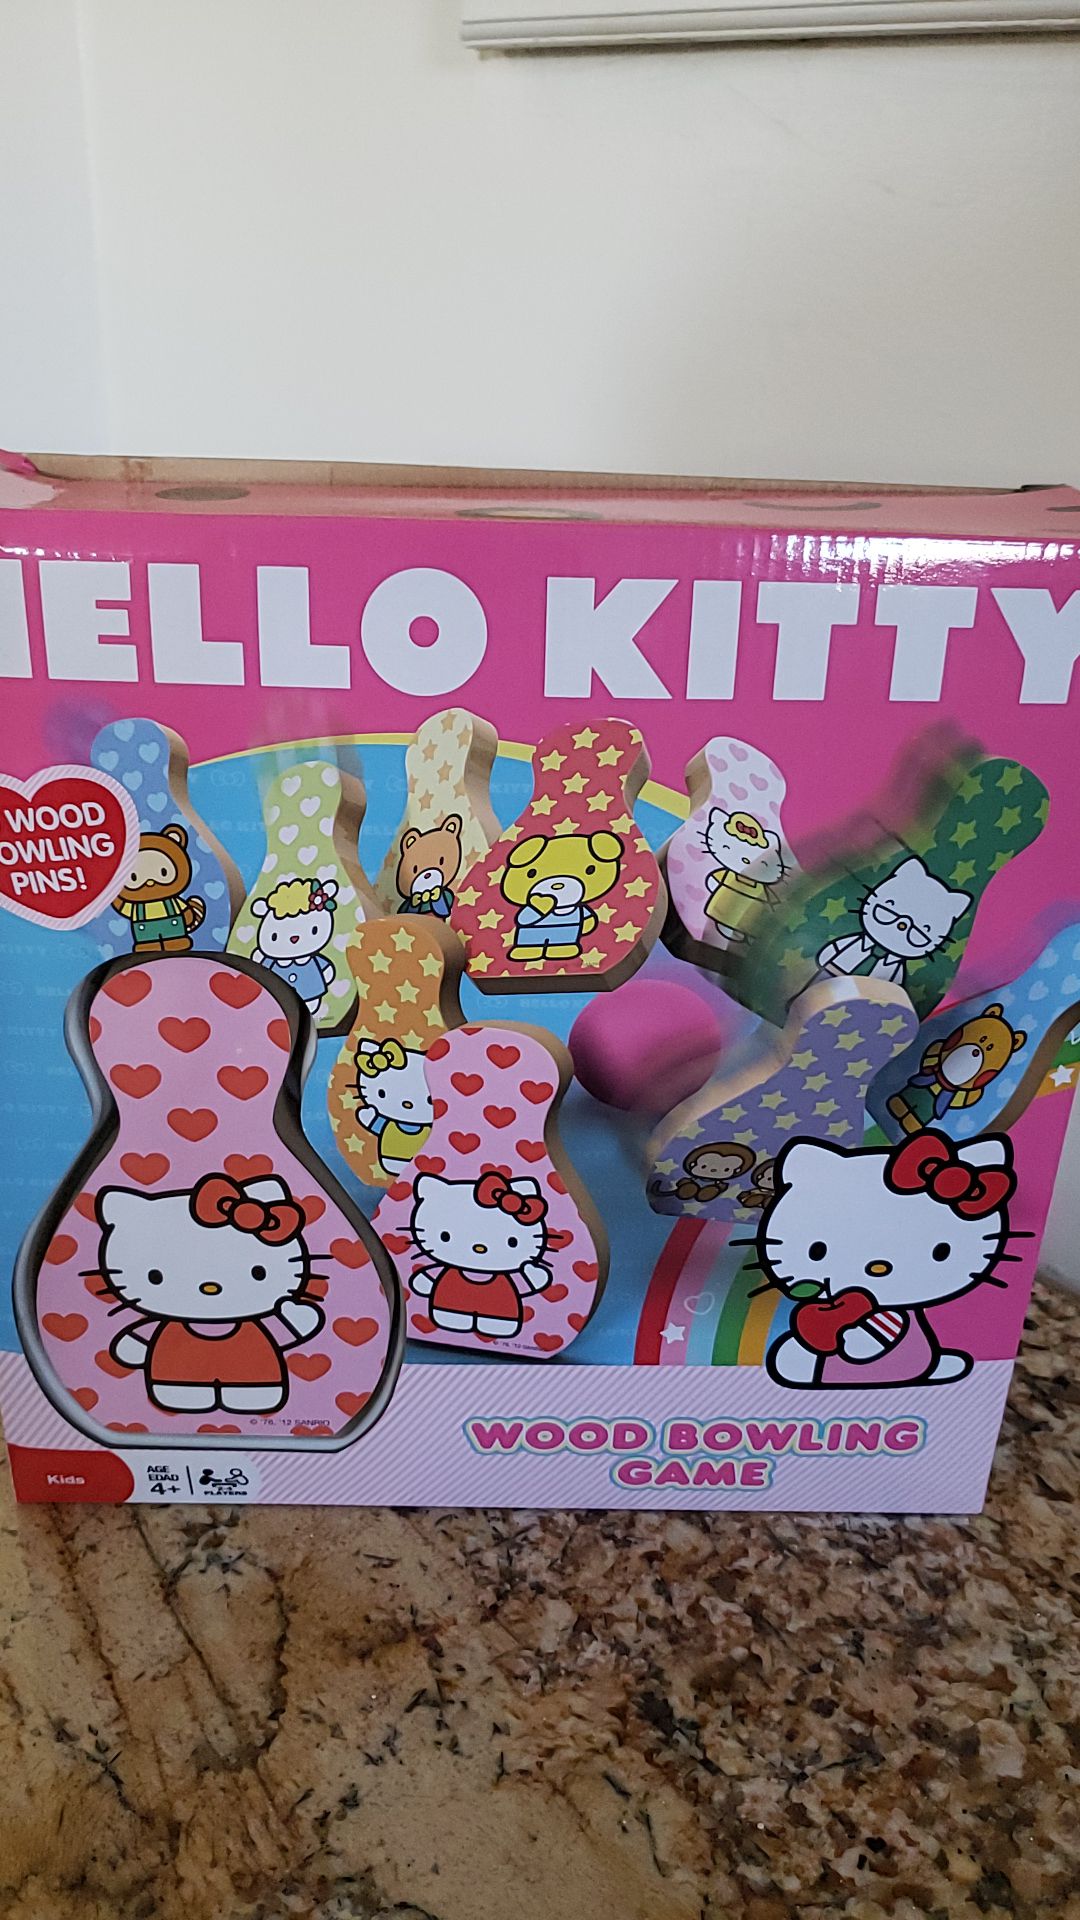 Hello kitty wood bowling game